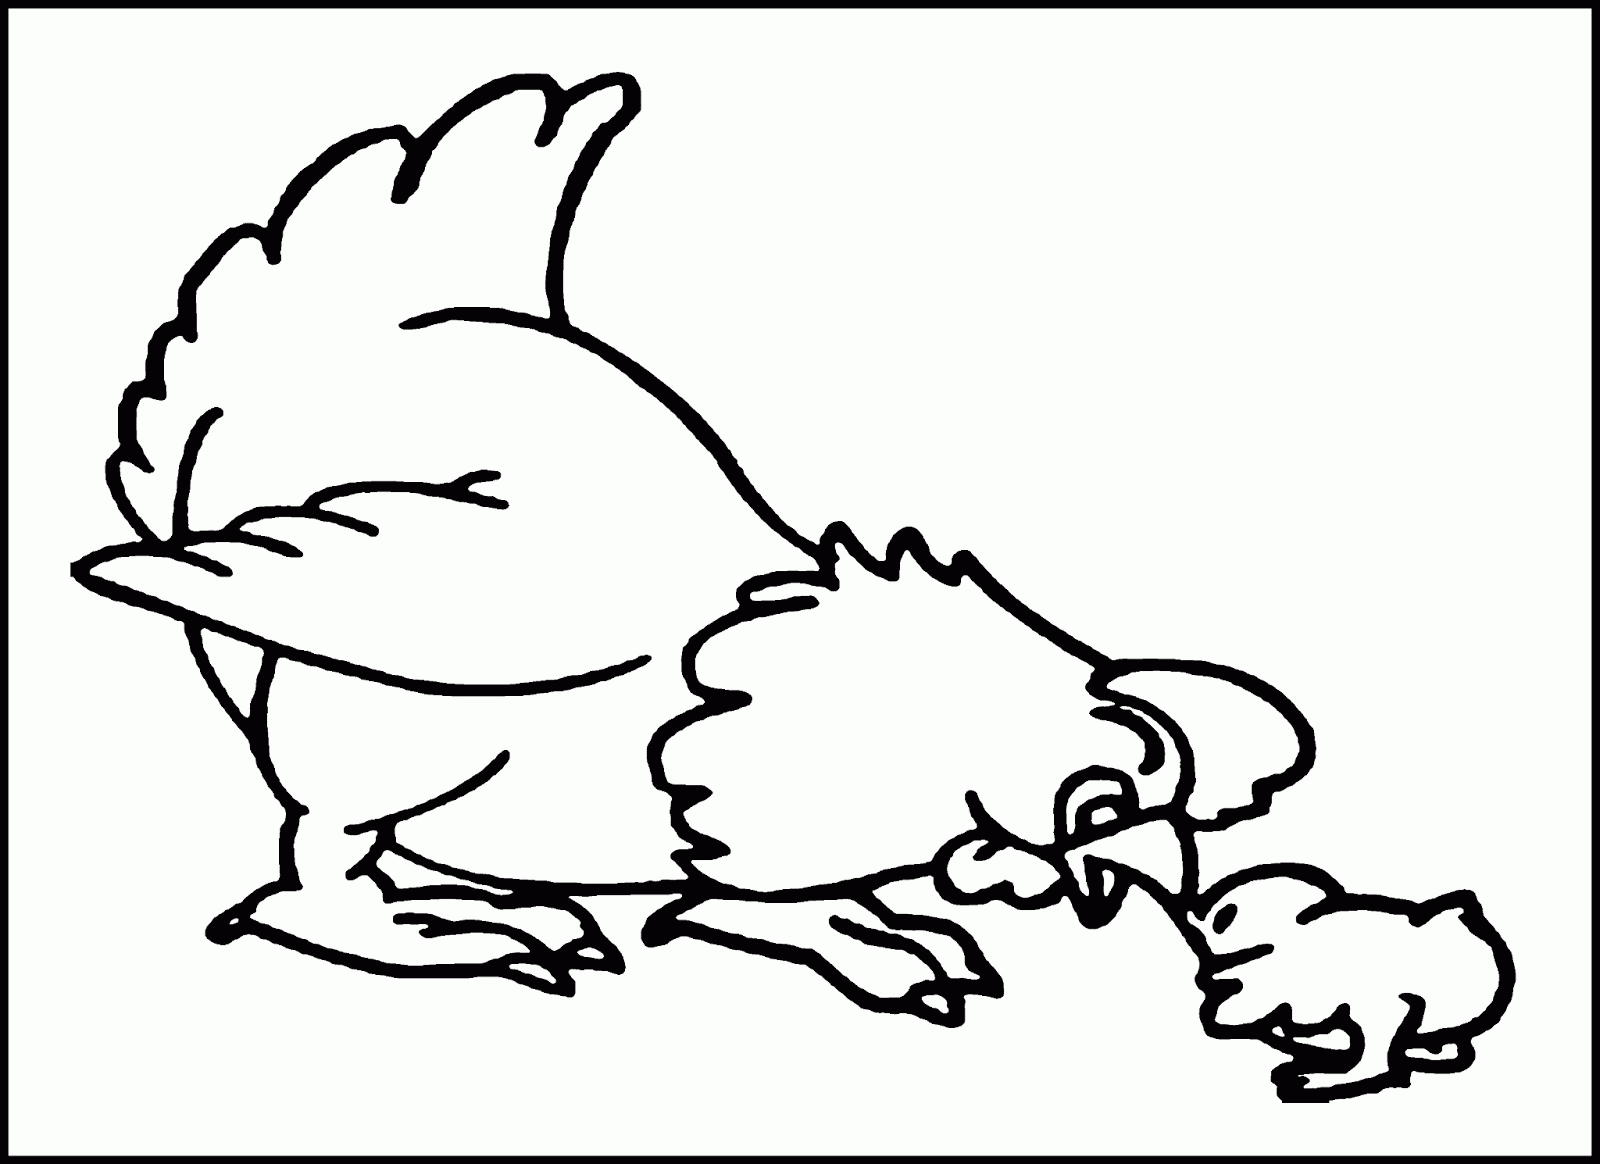 Chicken Fingers Coloring Page - Coloring Pages For All Ages